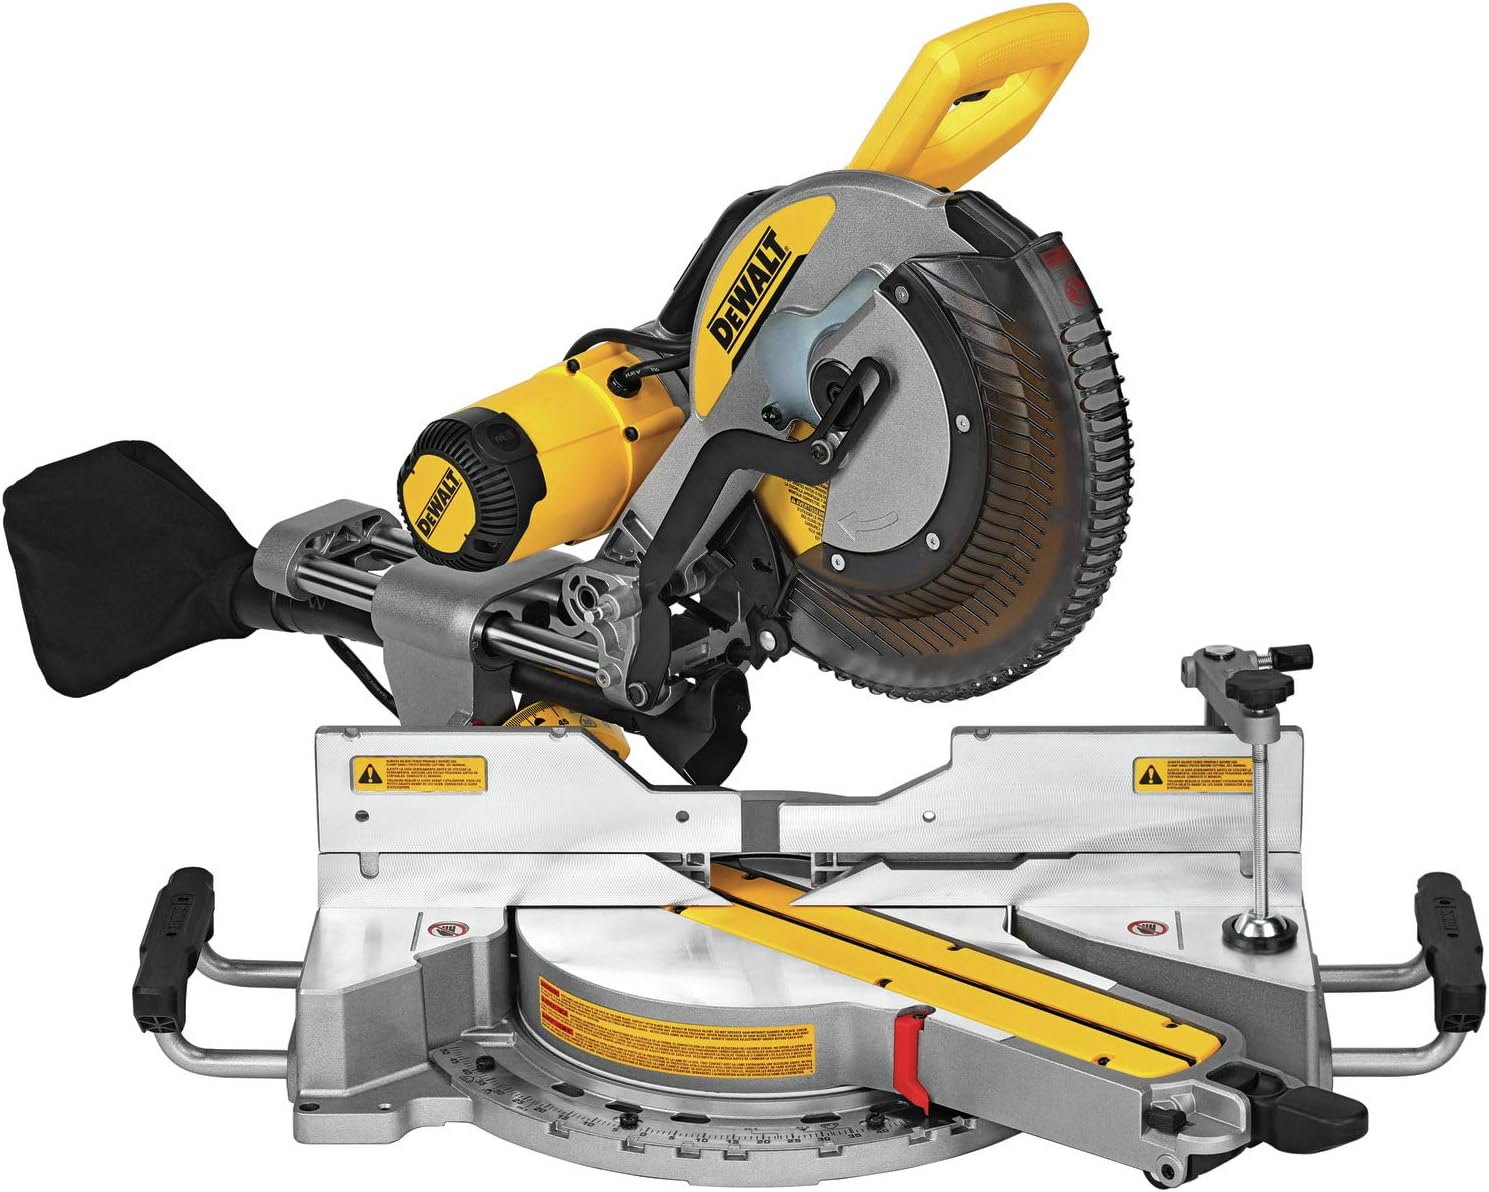 Best Compound Miter Saw for Dust Collection